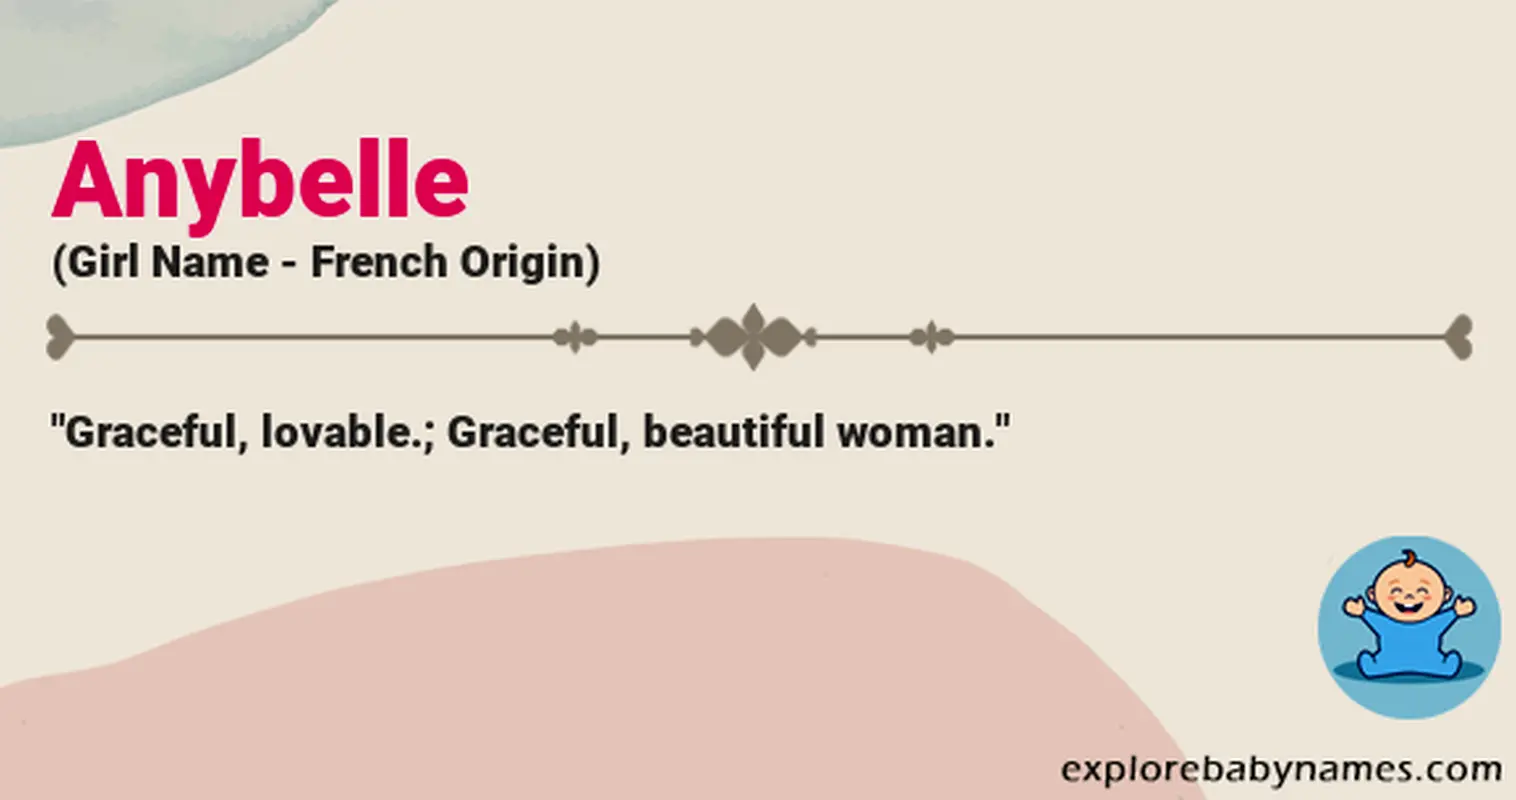 Meaning of Anybelle